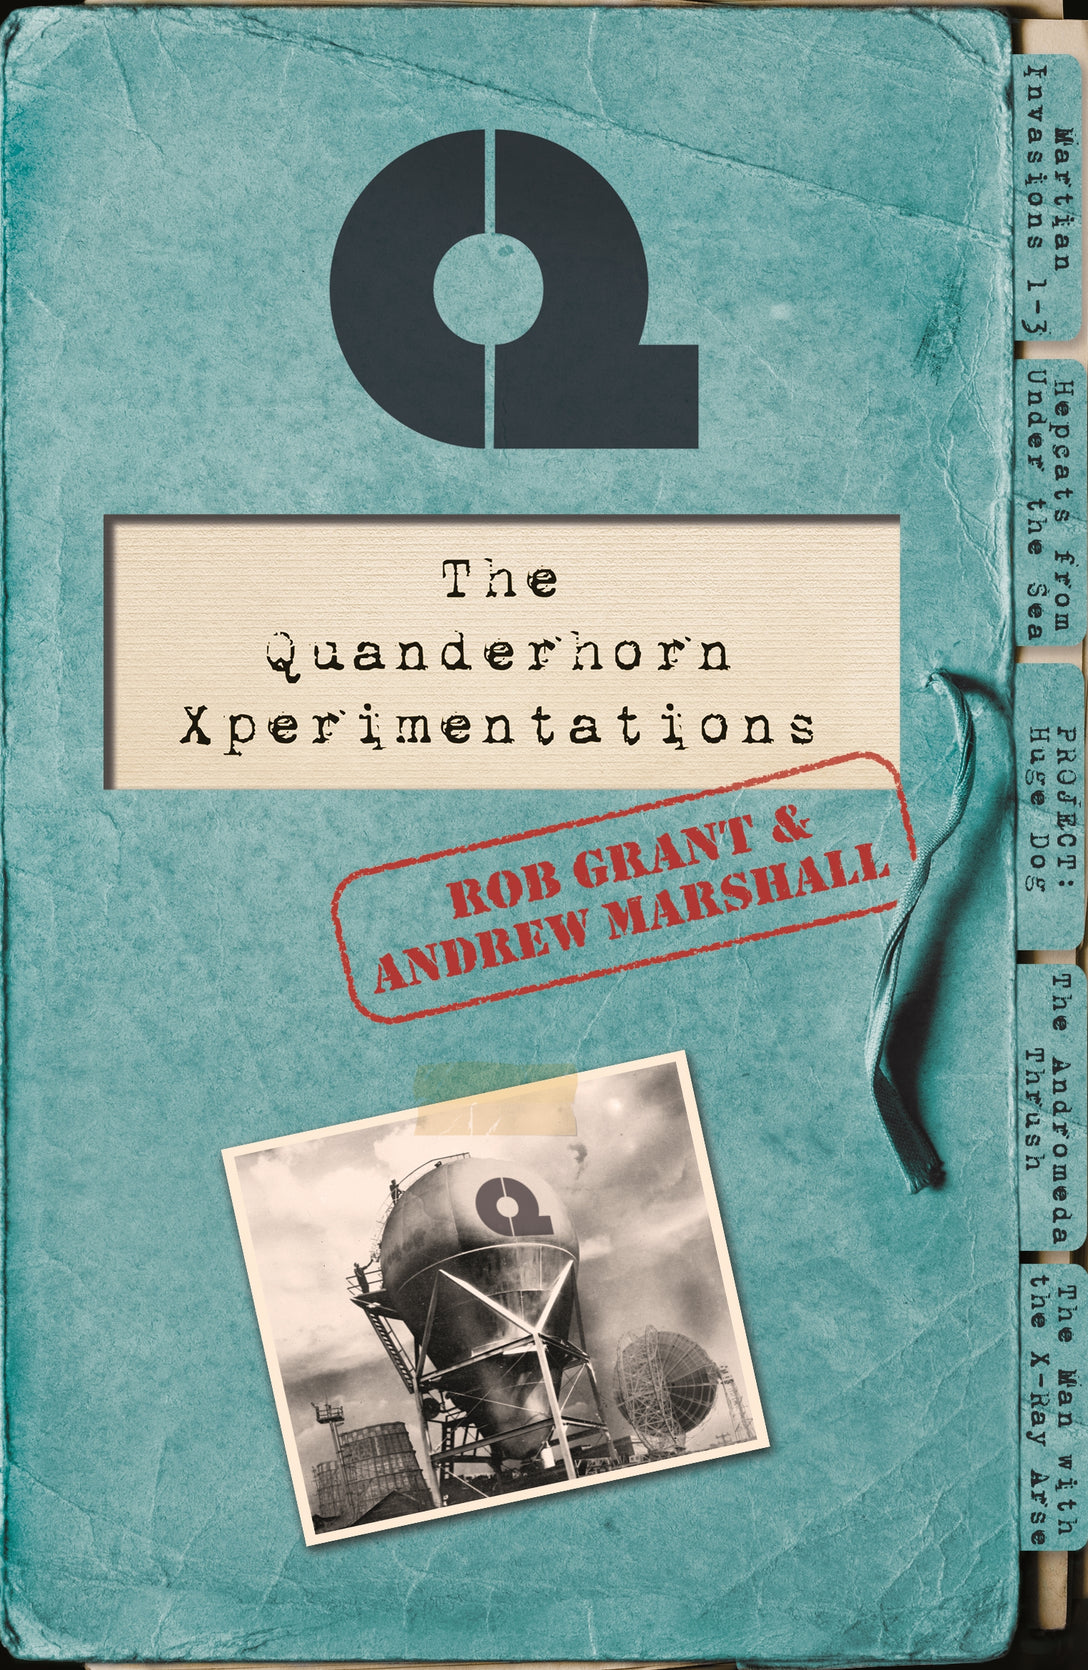 The Quanderhorn Xperimentations by Rob Grant, Andrew Marshall